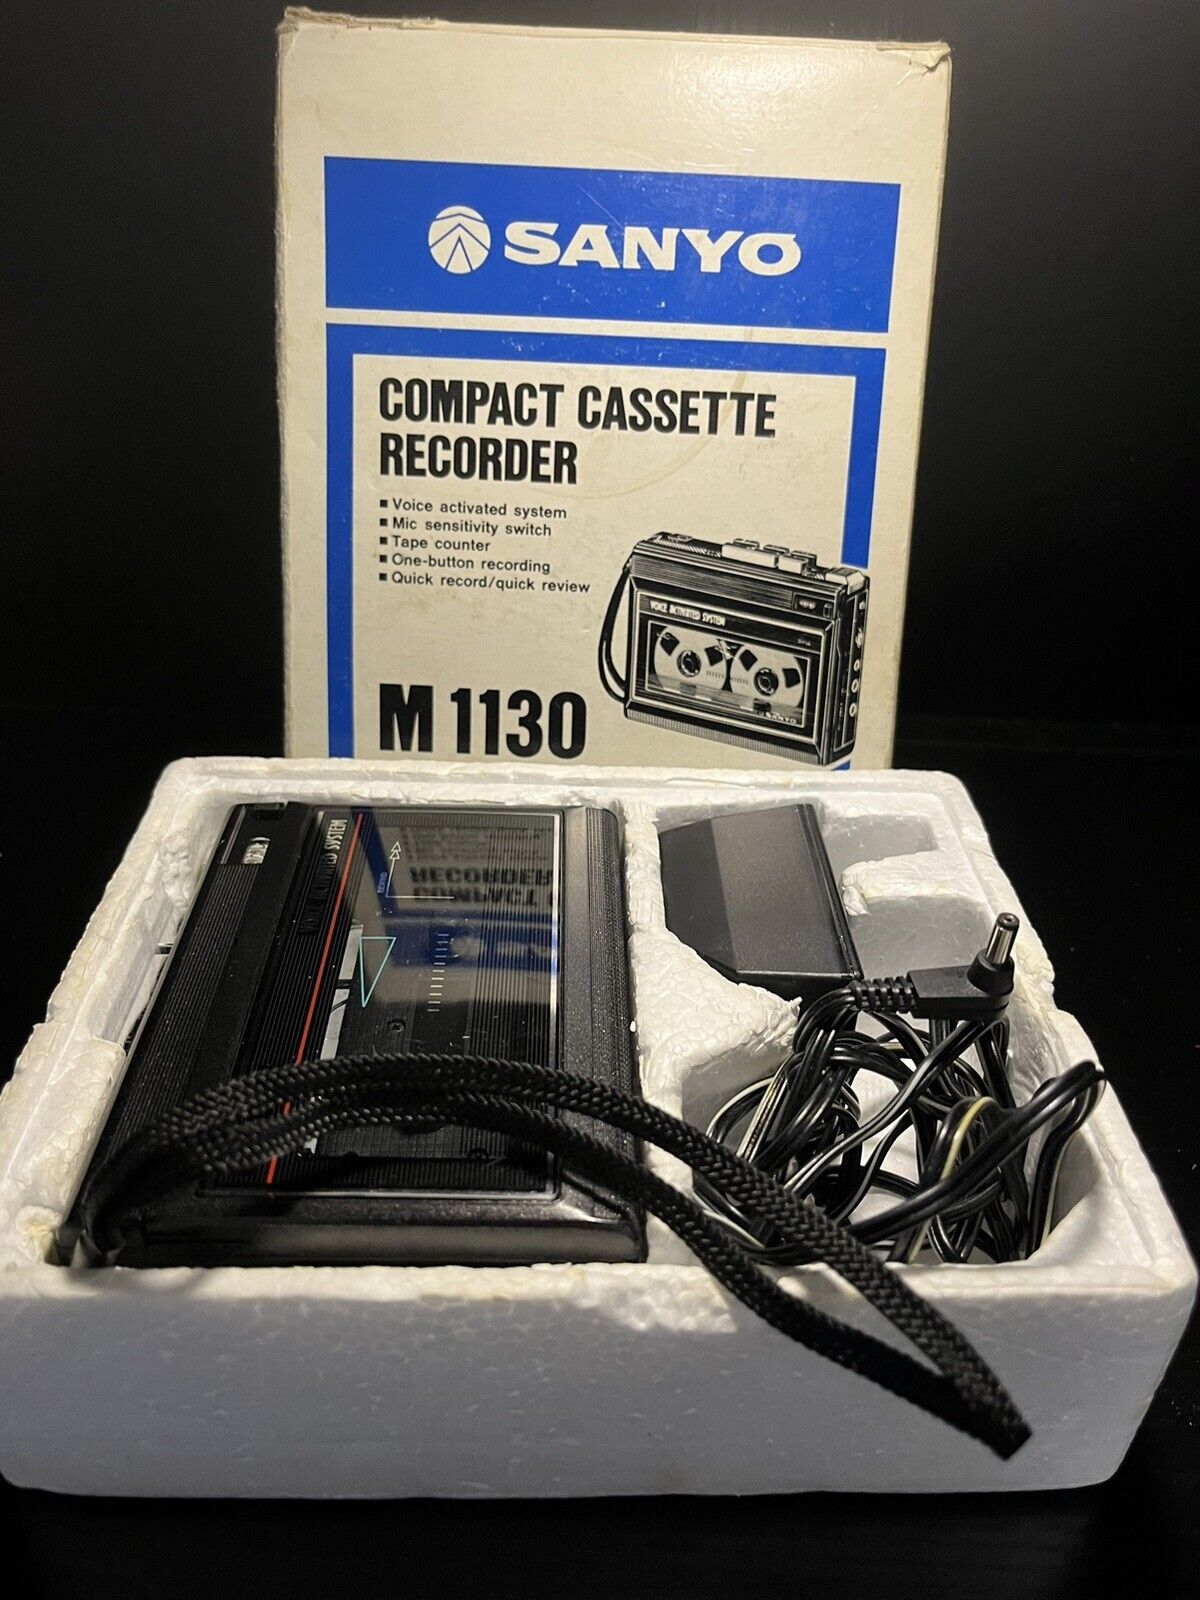 Vintage Sanyo Compact Cassette Recorder M1130 Tested Working With Original Box